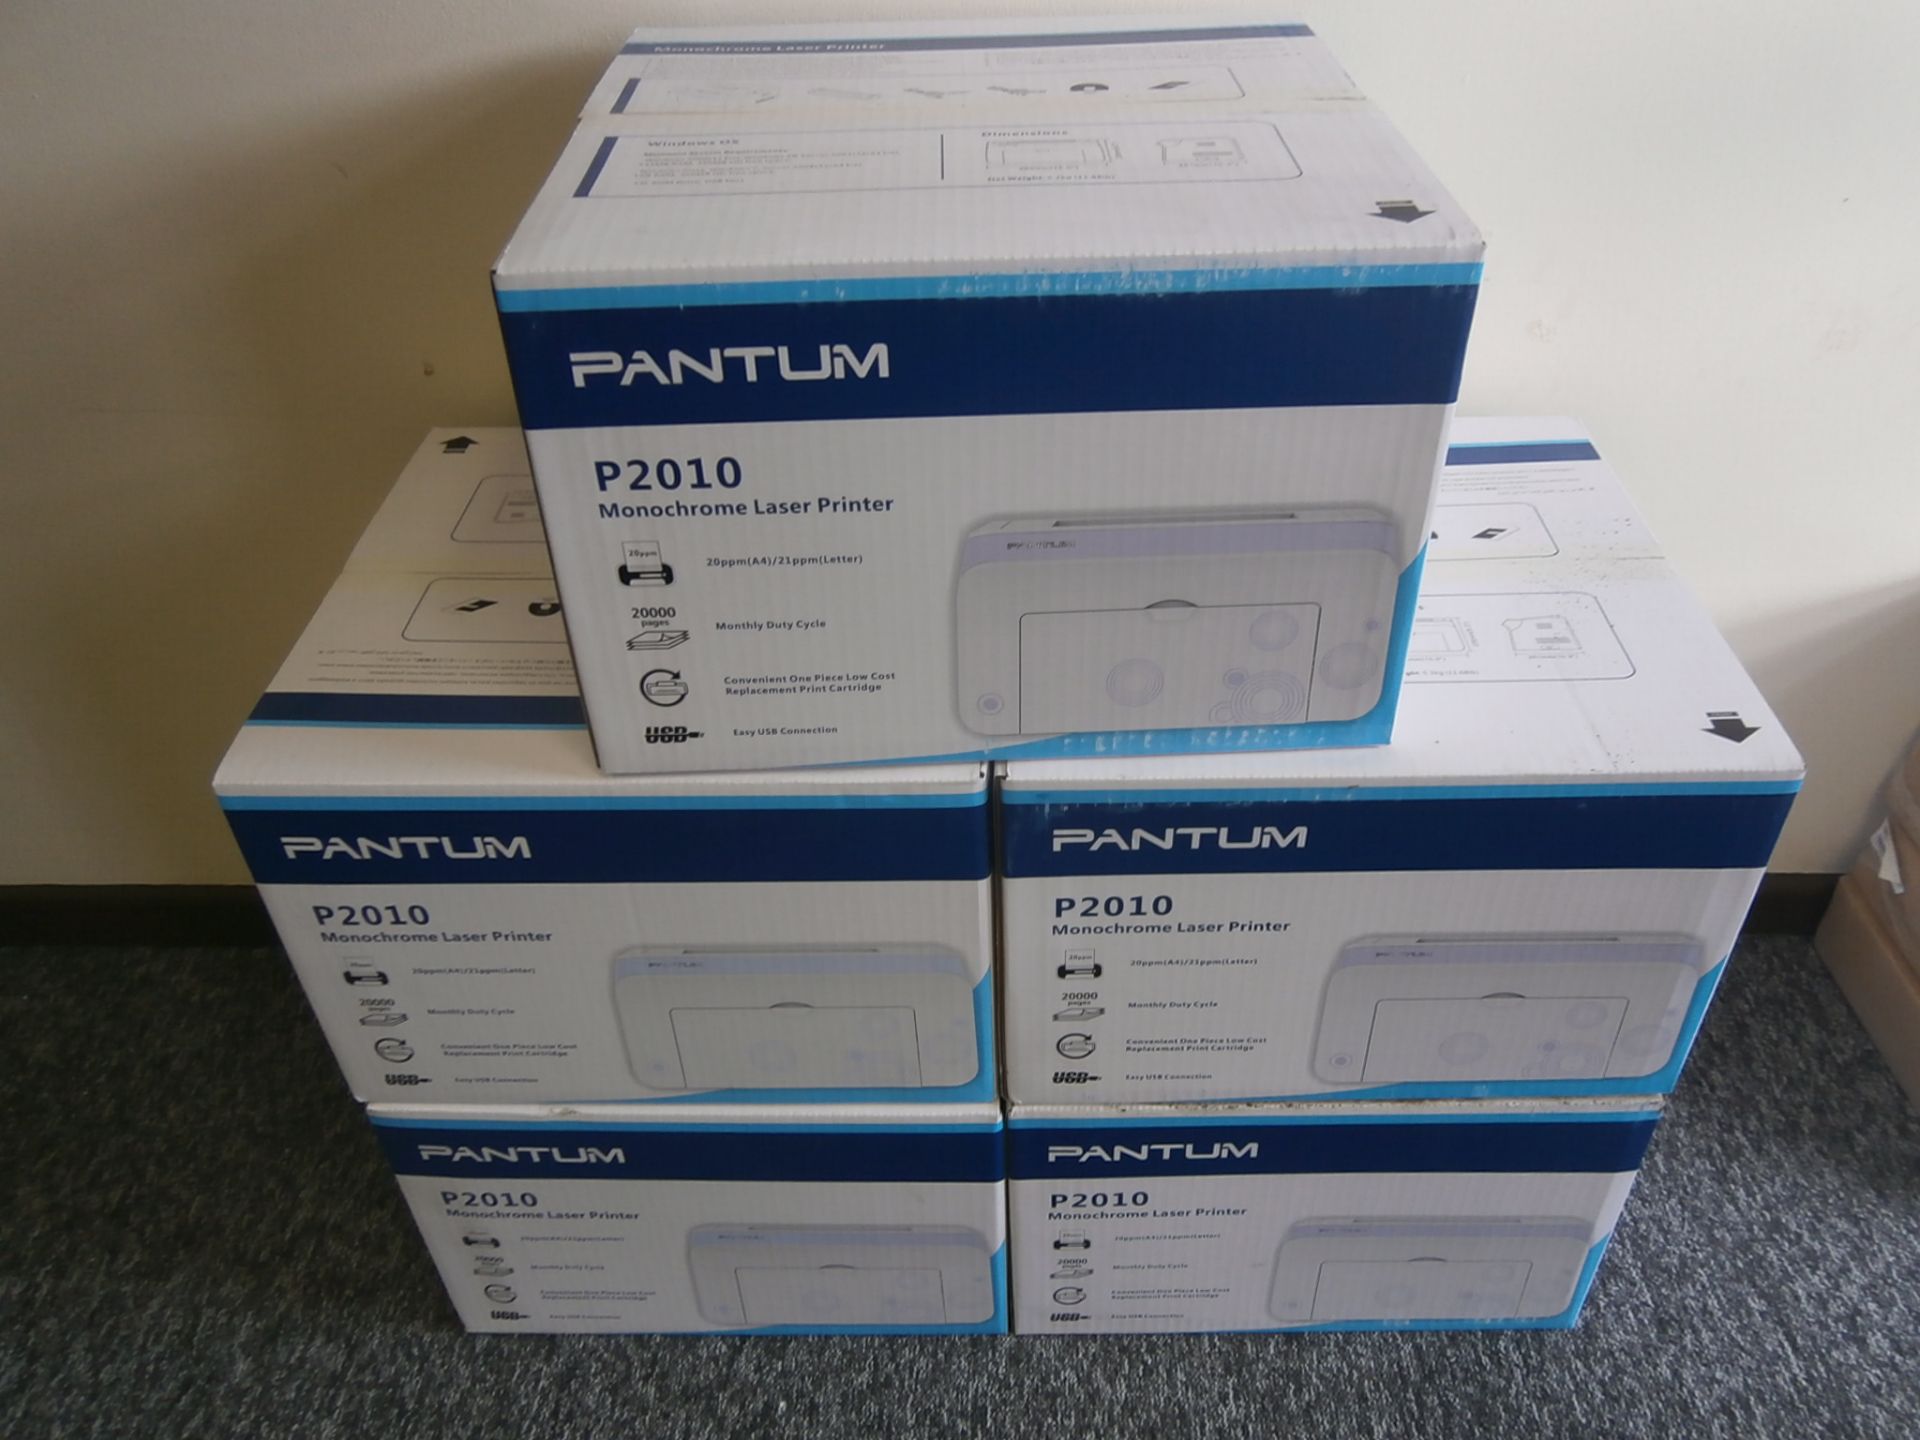 5 x Pantum P2010 Monochrome Laser Printers - RRP £49.99 Each (These printers are great value for